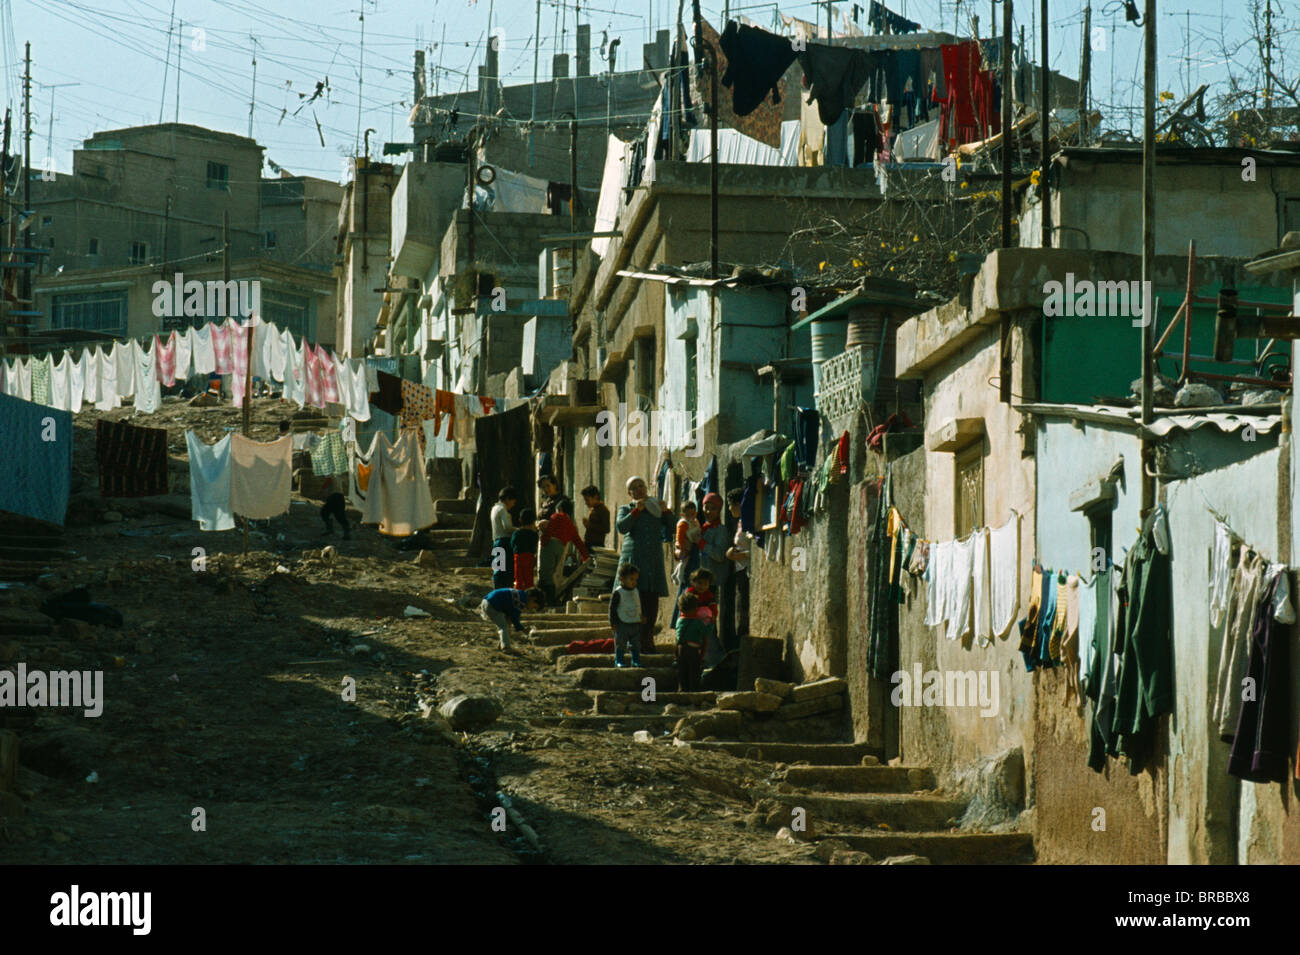 Jordan Middle East Amman Palestinian Refugee Camp. Women And Children  Outside Housing on hillside Hung With Washing Stock Photo - Alamy